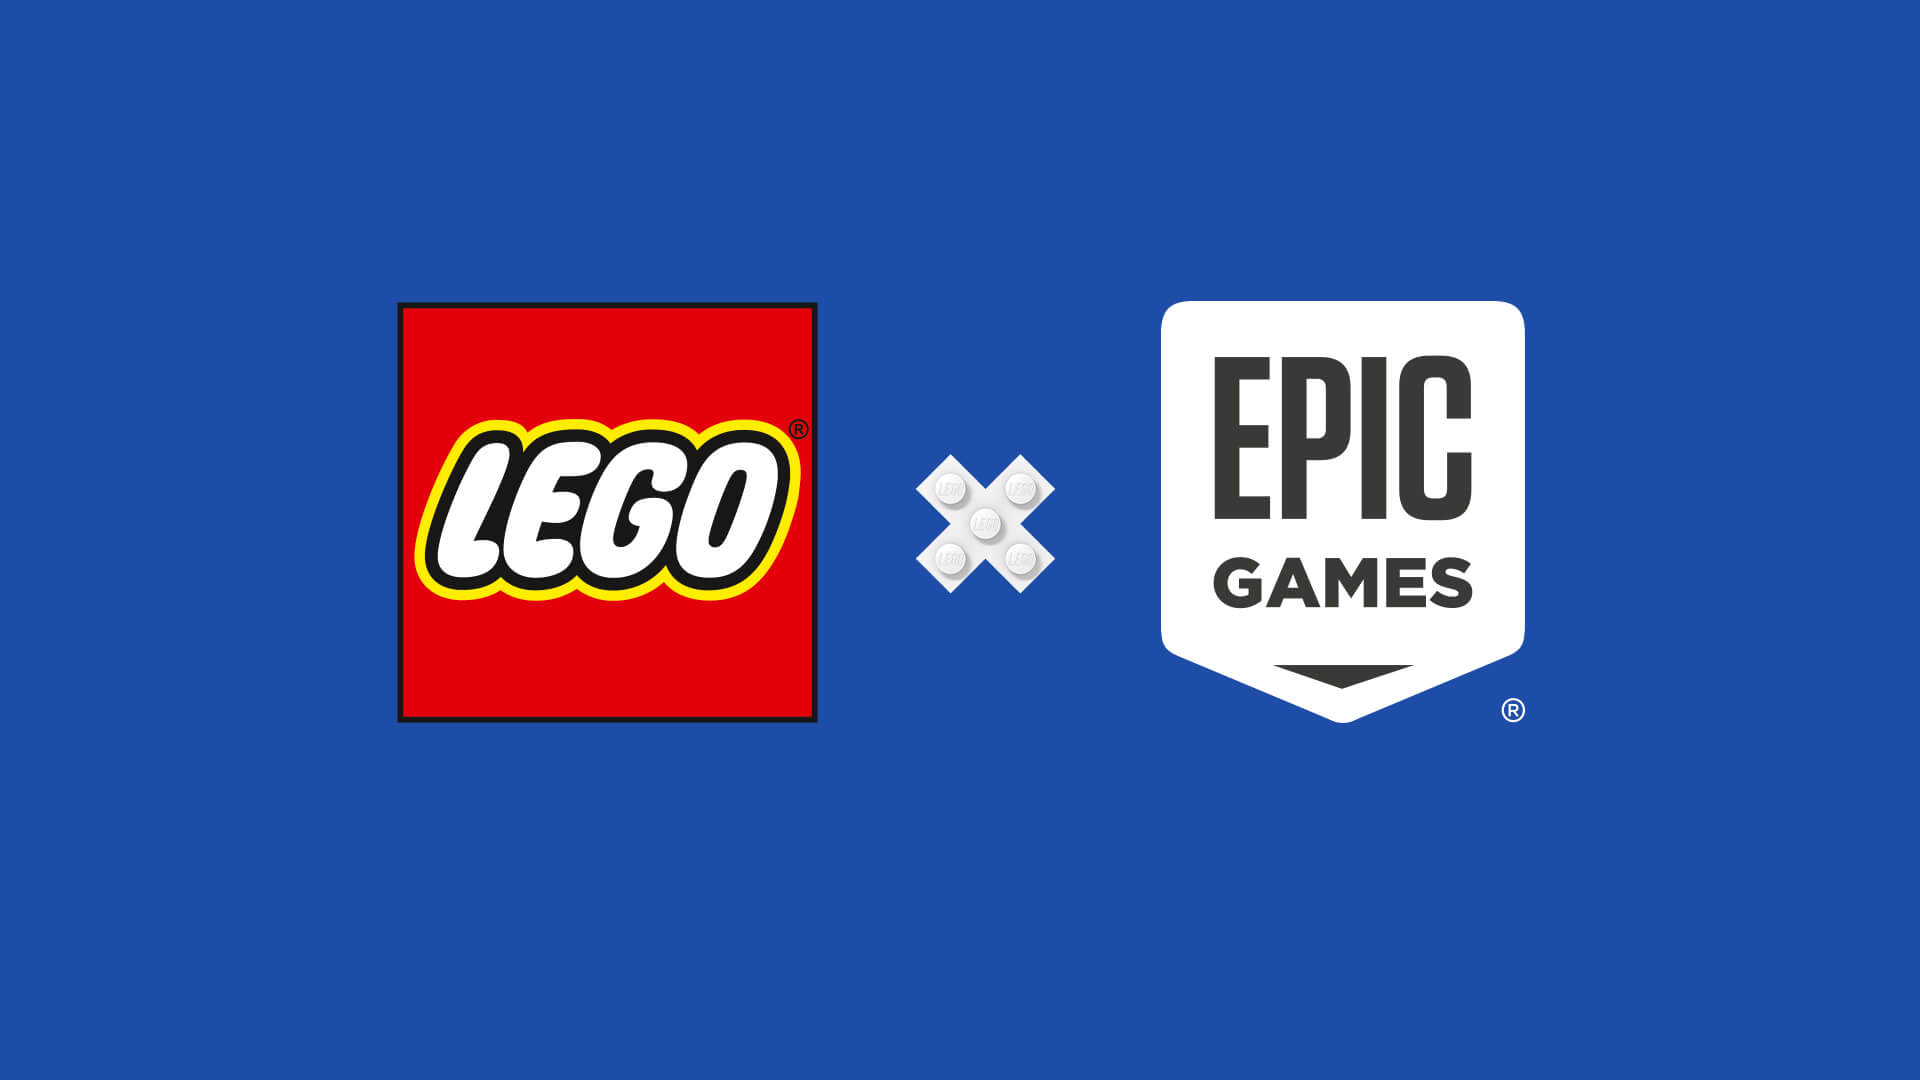 Epic Games and LEGO are joining forces to keep kids safe online